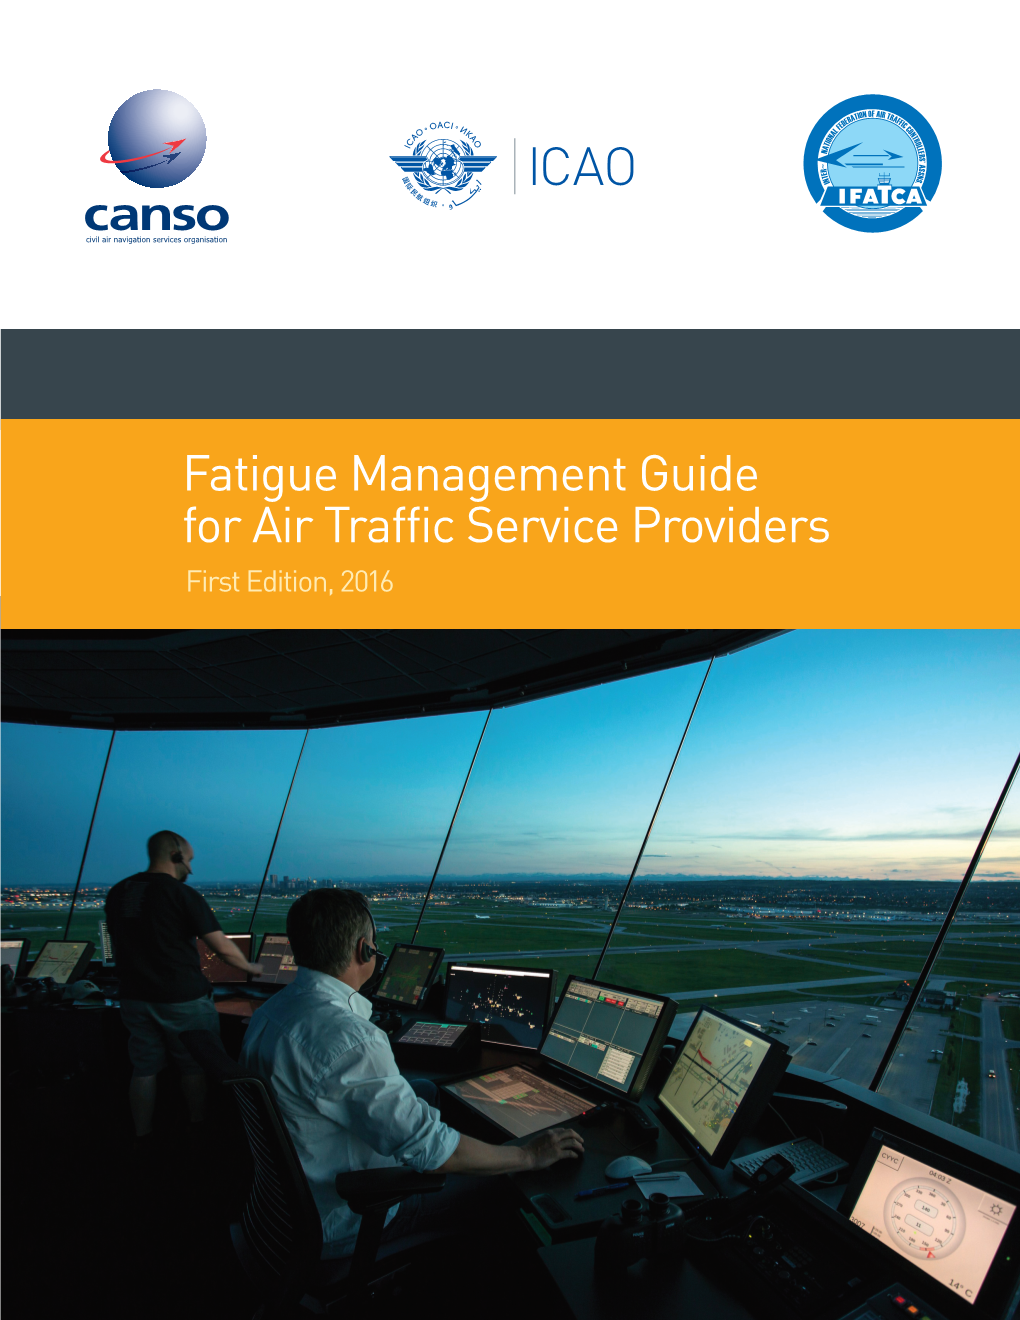 Fatigue Management Guide for Air Traffic Service Providers First Edition, 2016